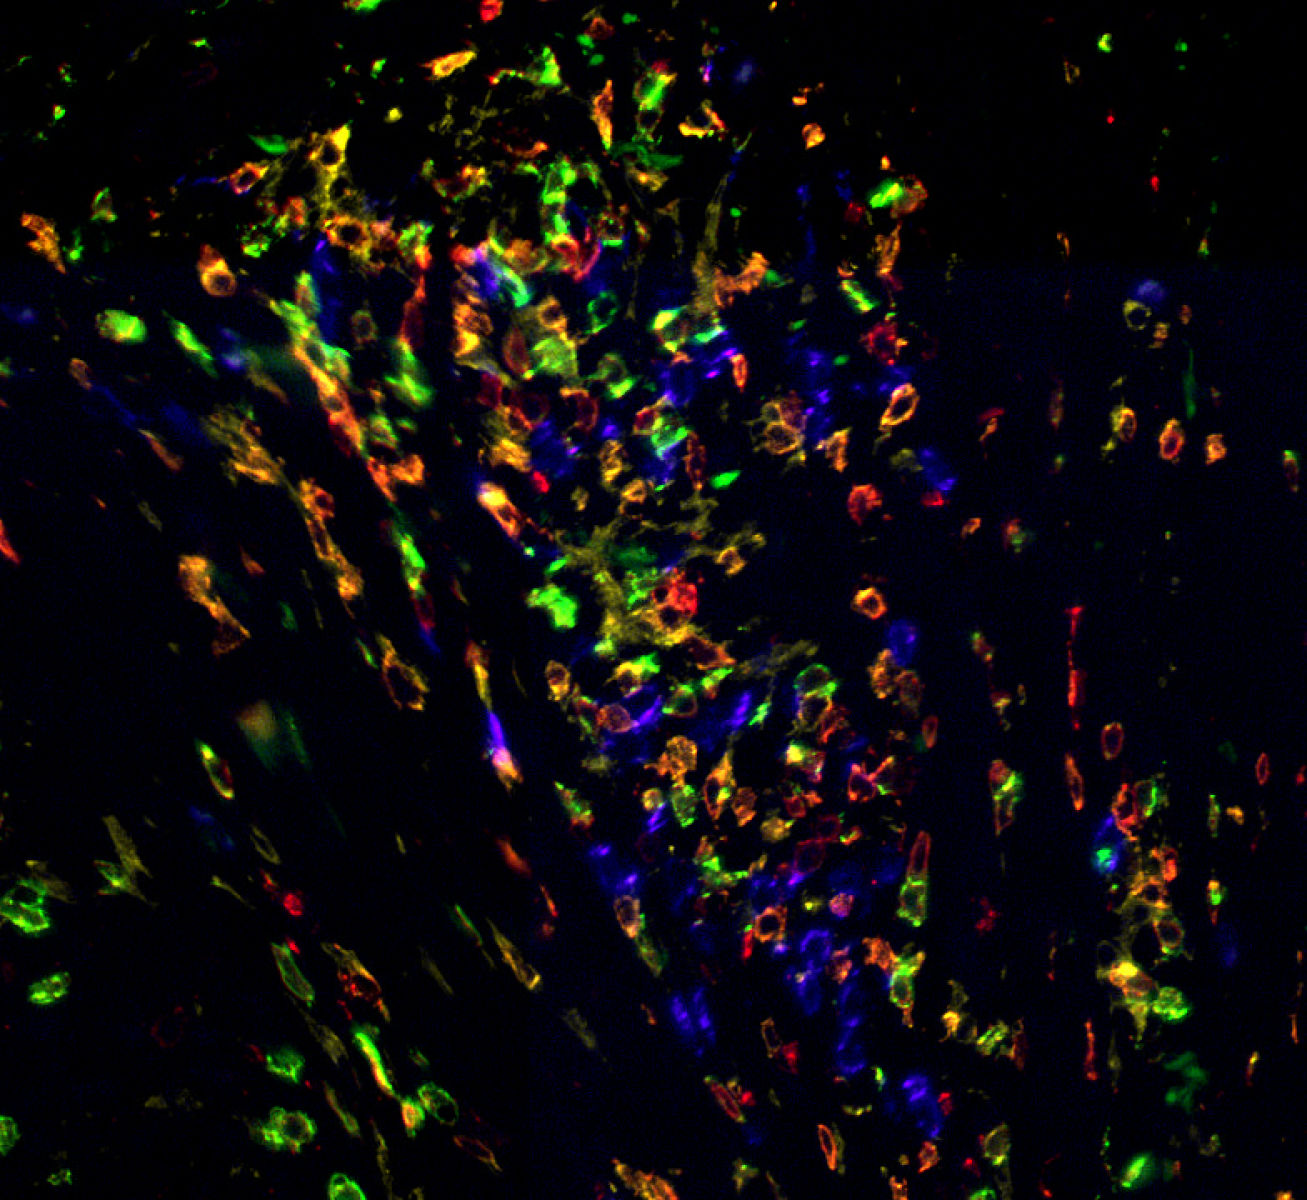 Bladder transitional cell carcinoma biopsy stained manually with HI-1A UltraPlex panel: CD3 (red), CD4 (yellow), CD8 (green), CD20 (purple). 20X magnification.